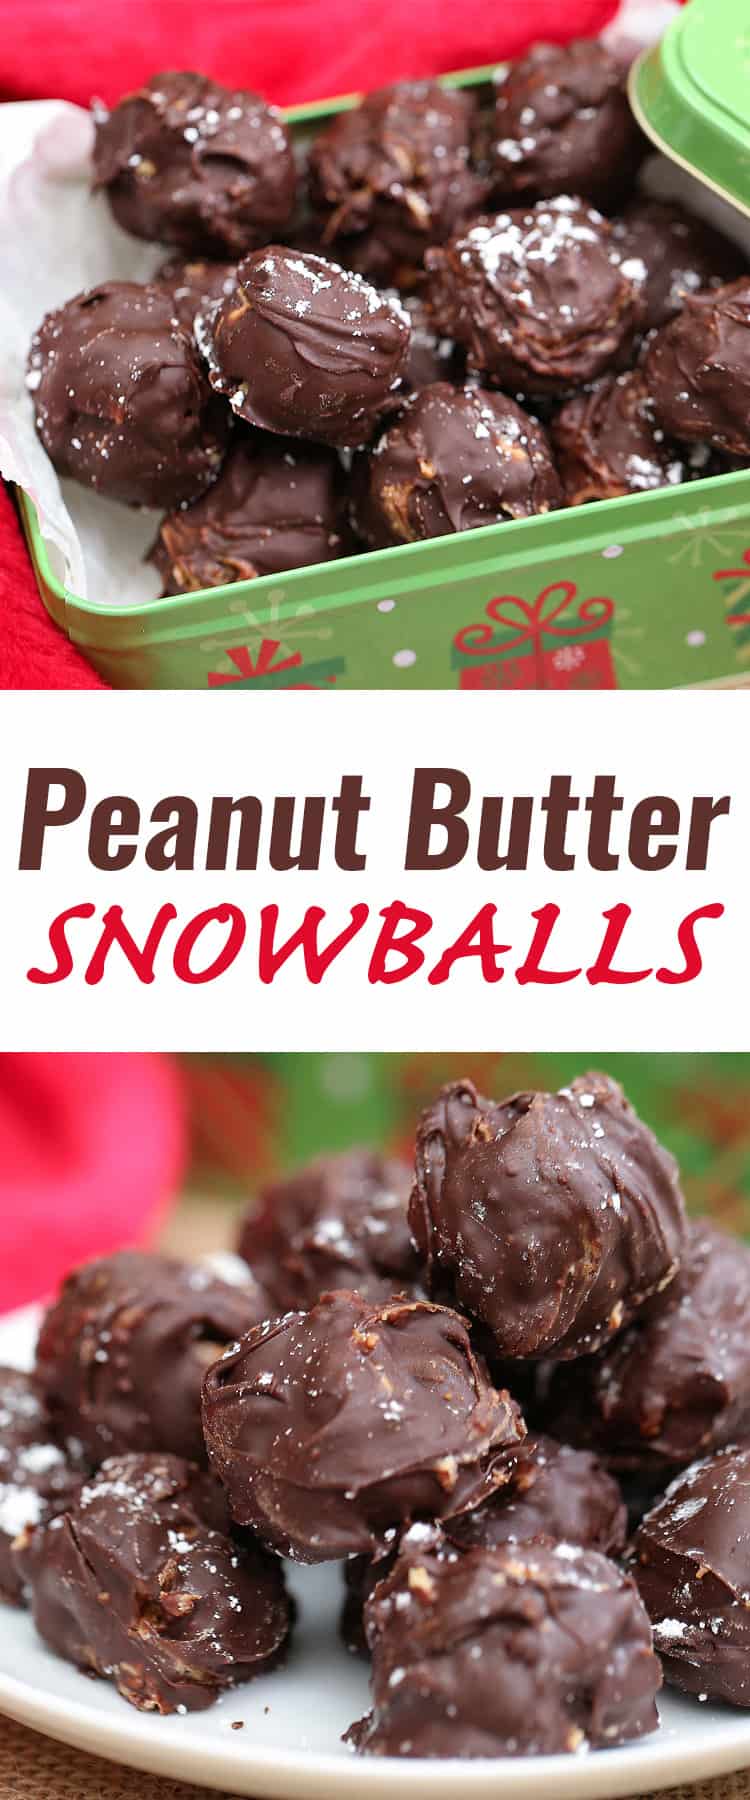 A close up of a peanut butter snowballs covered in chocolate